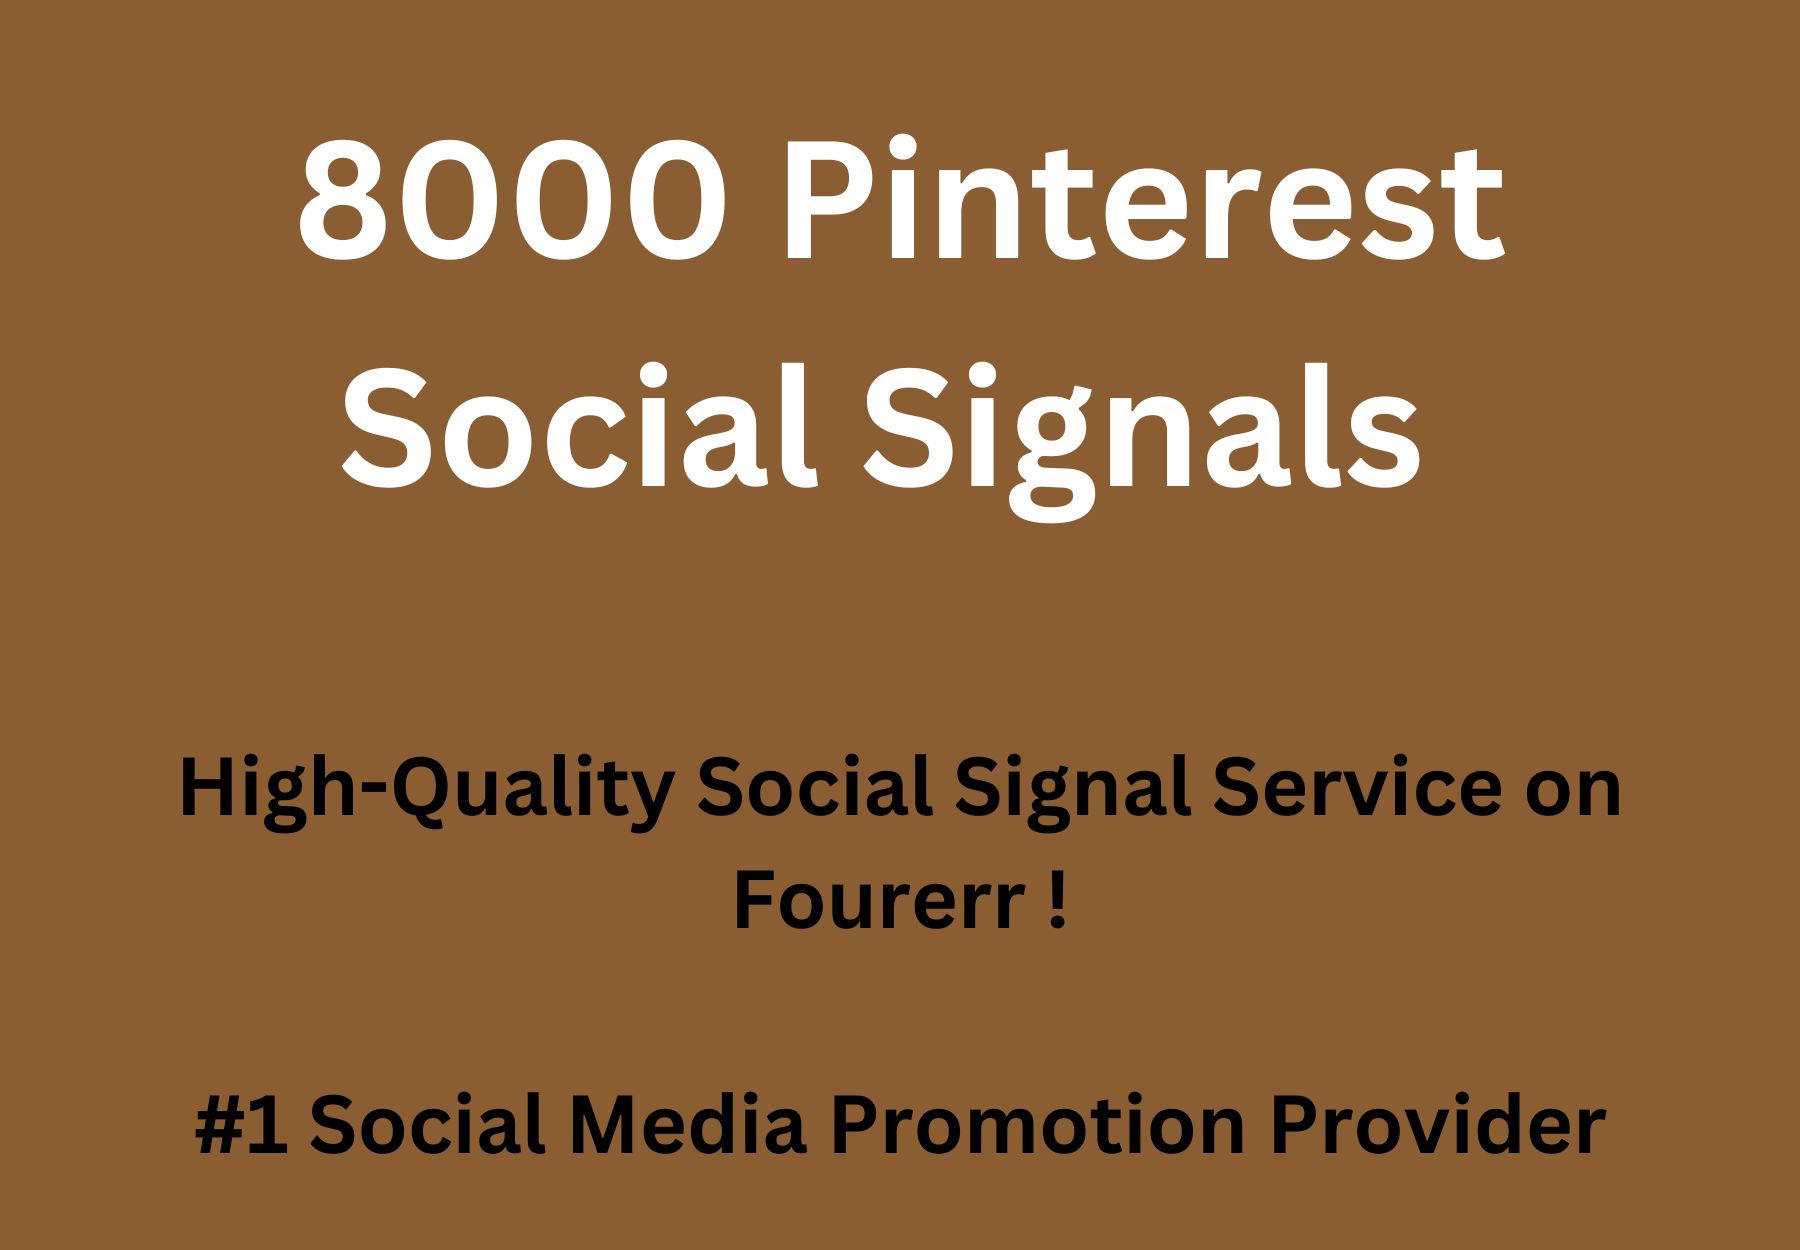 8000 Pinterest Social Signals Google First Page Ranking only $ 4